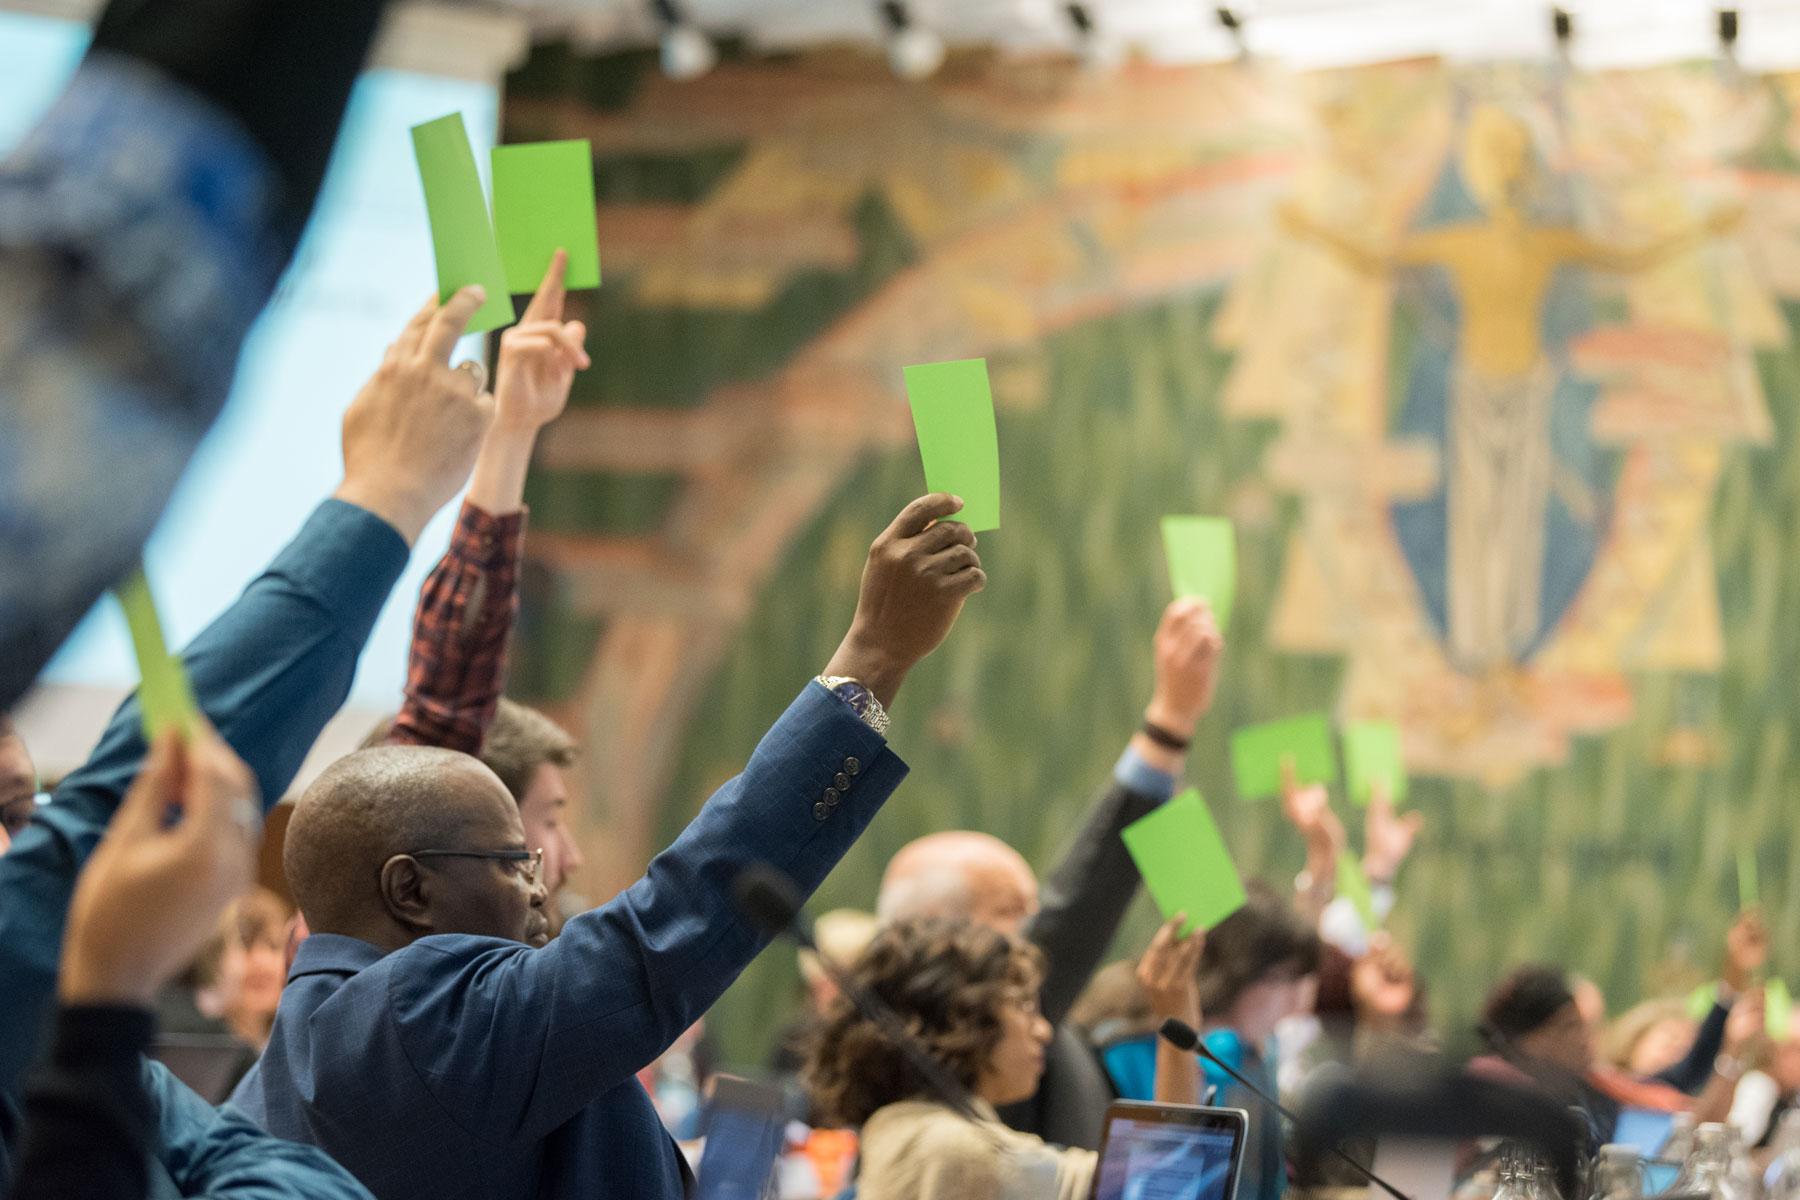 Council members voting on a new structure for the LWF Communion Office. Photo: LWF/Albin Hillert